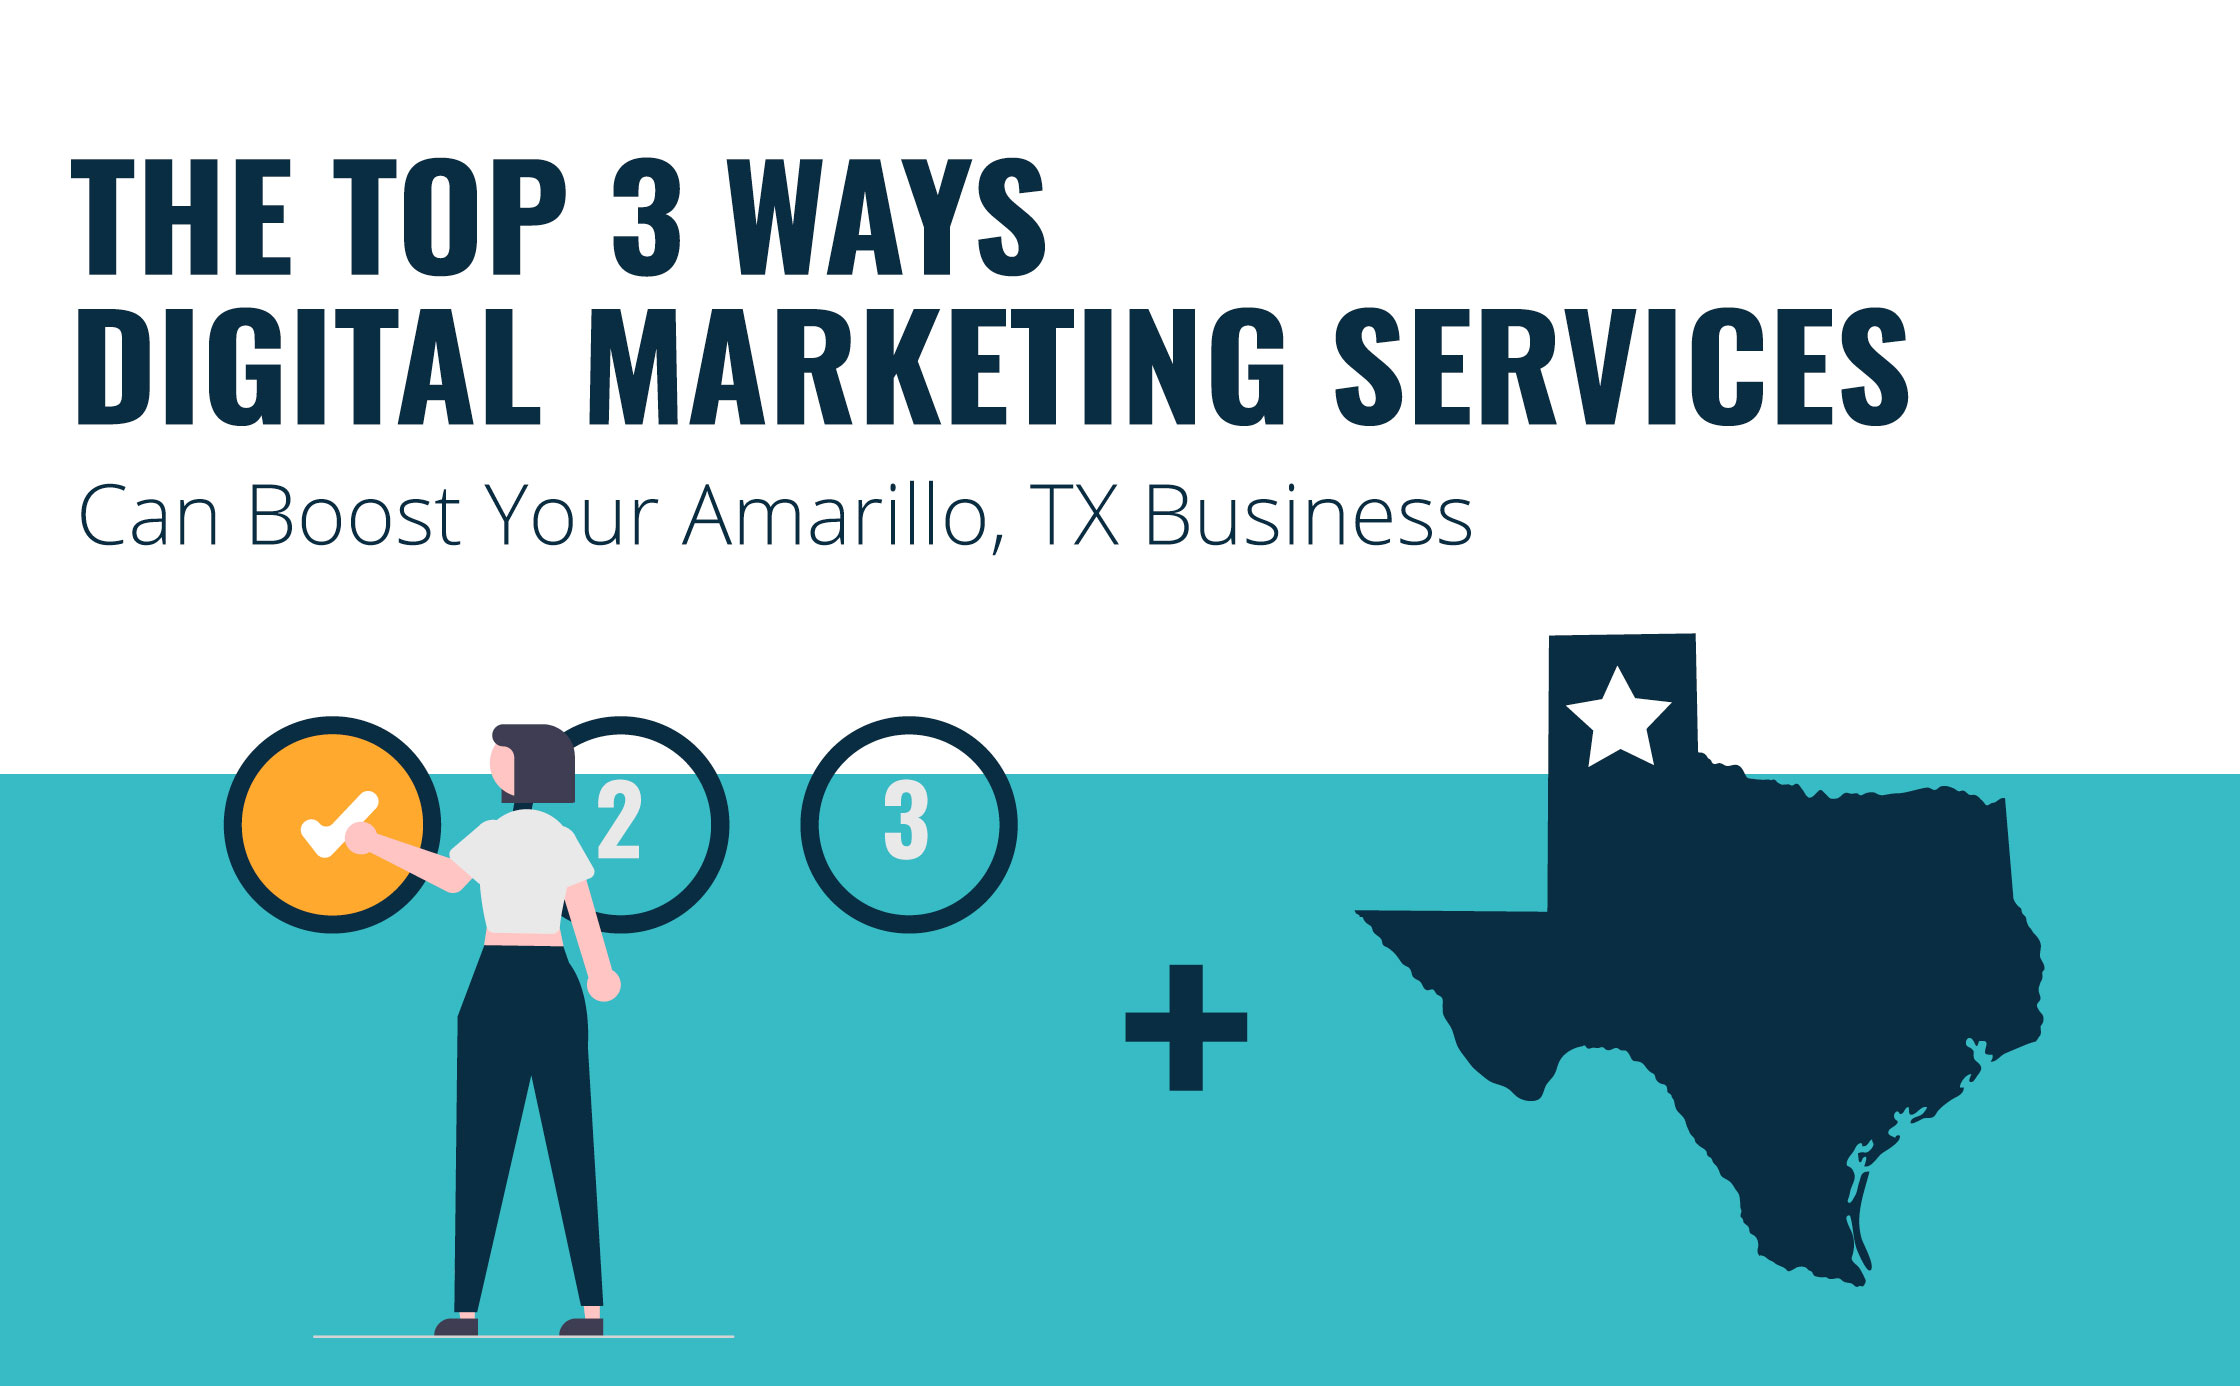 Top 3 Ways Digital Marketing Services Can Boost Your Amarillo, TX Business